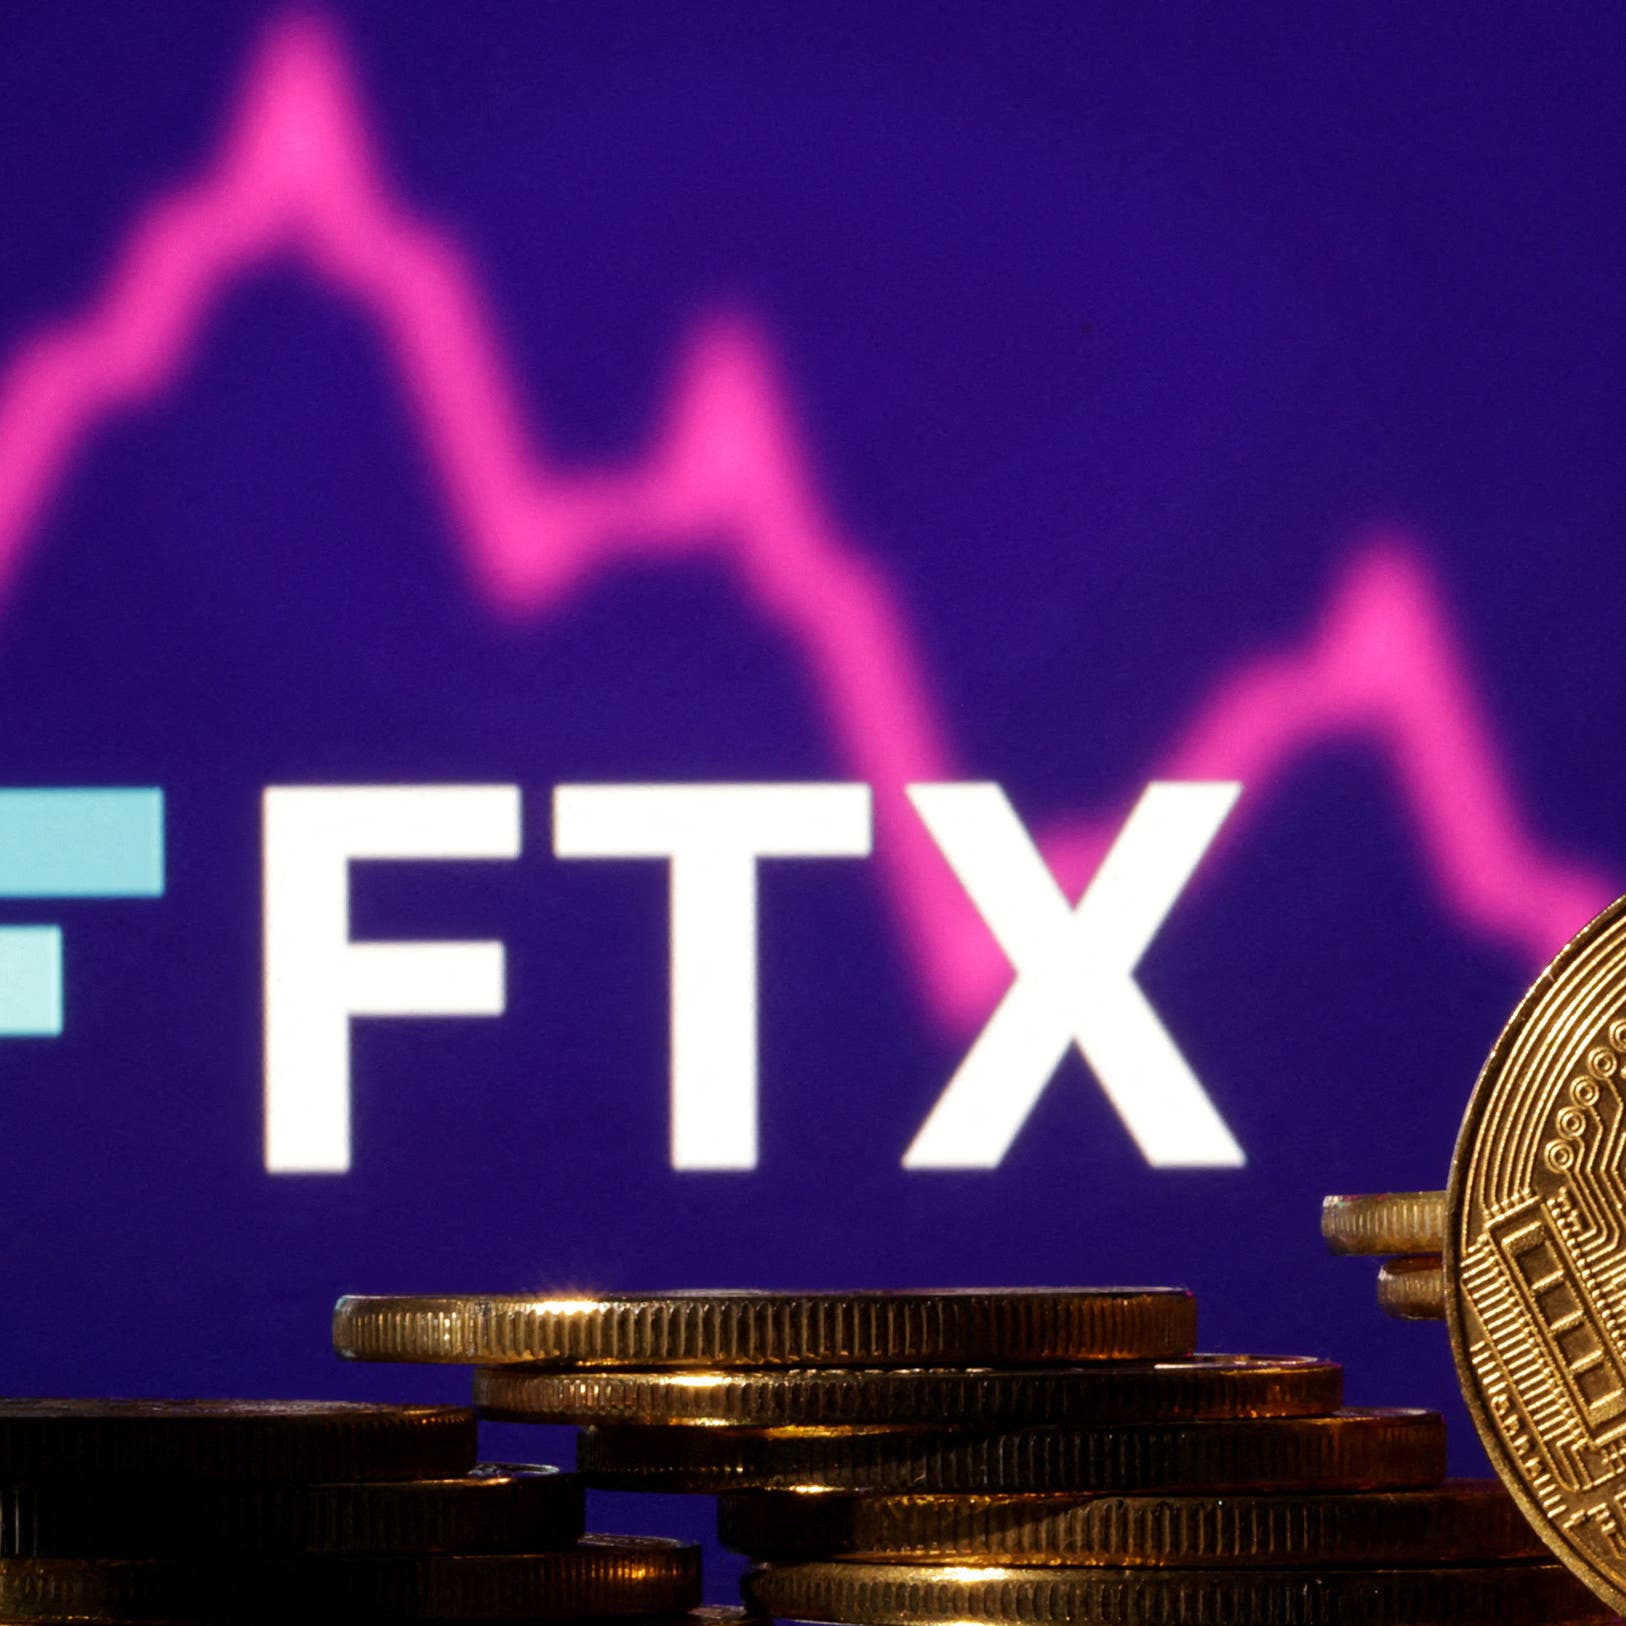 Failed crypto exchange FTX has recovered over $5 bln, attorney says